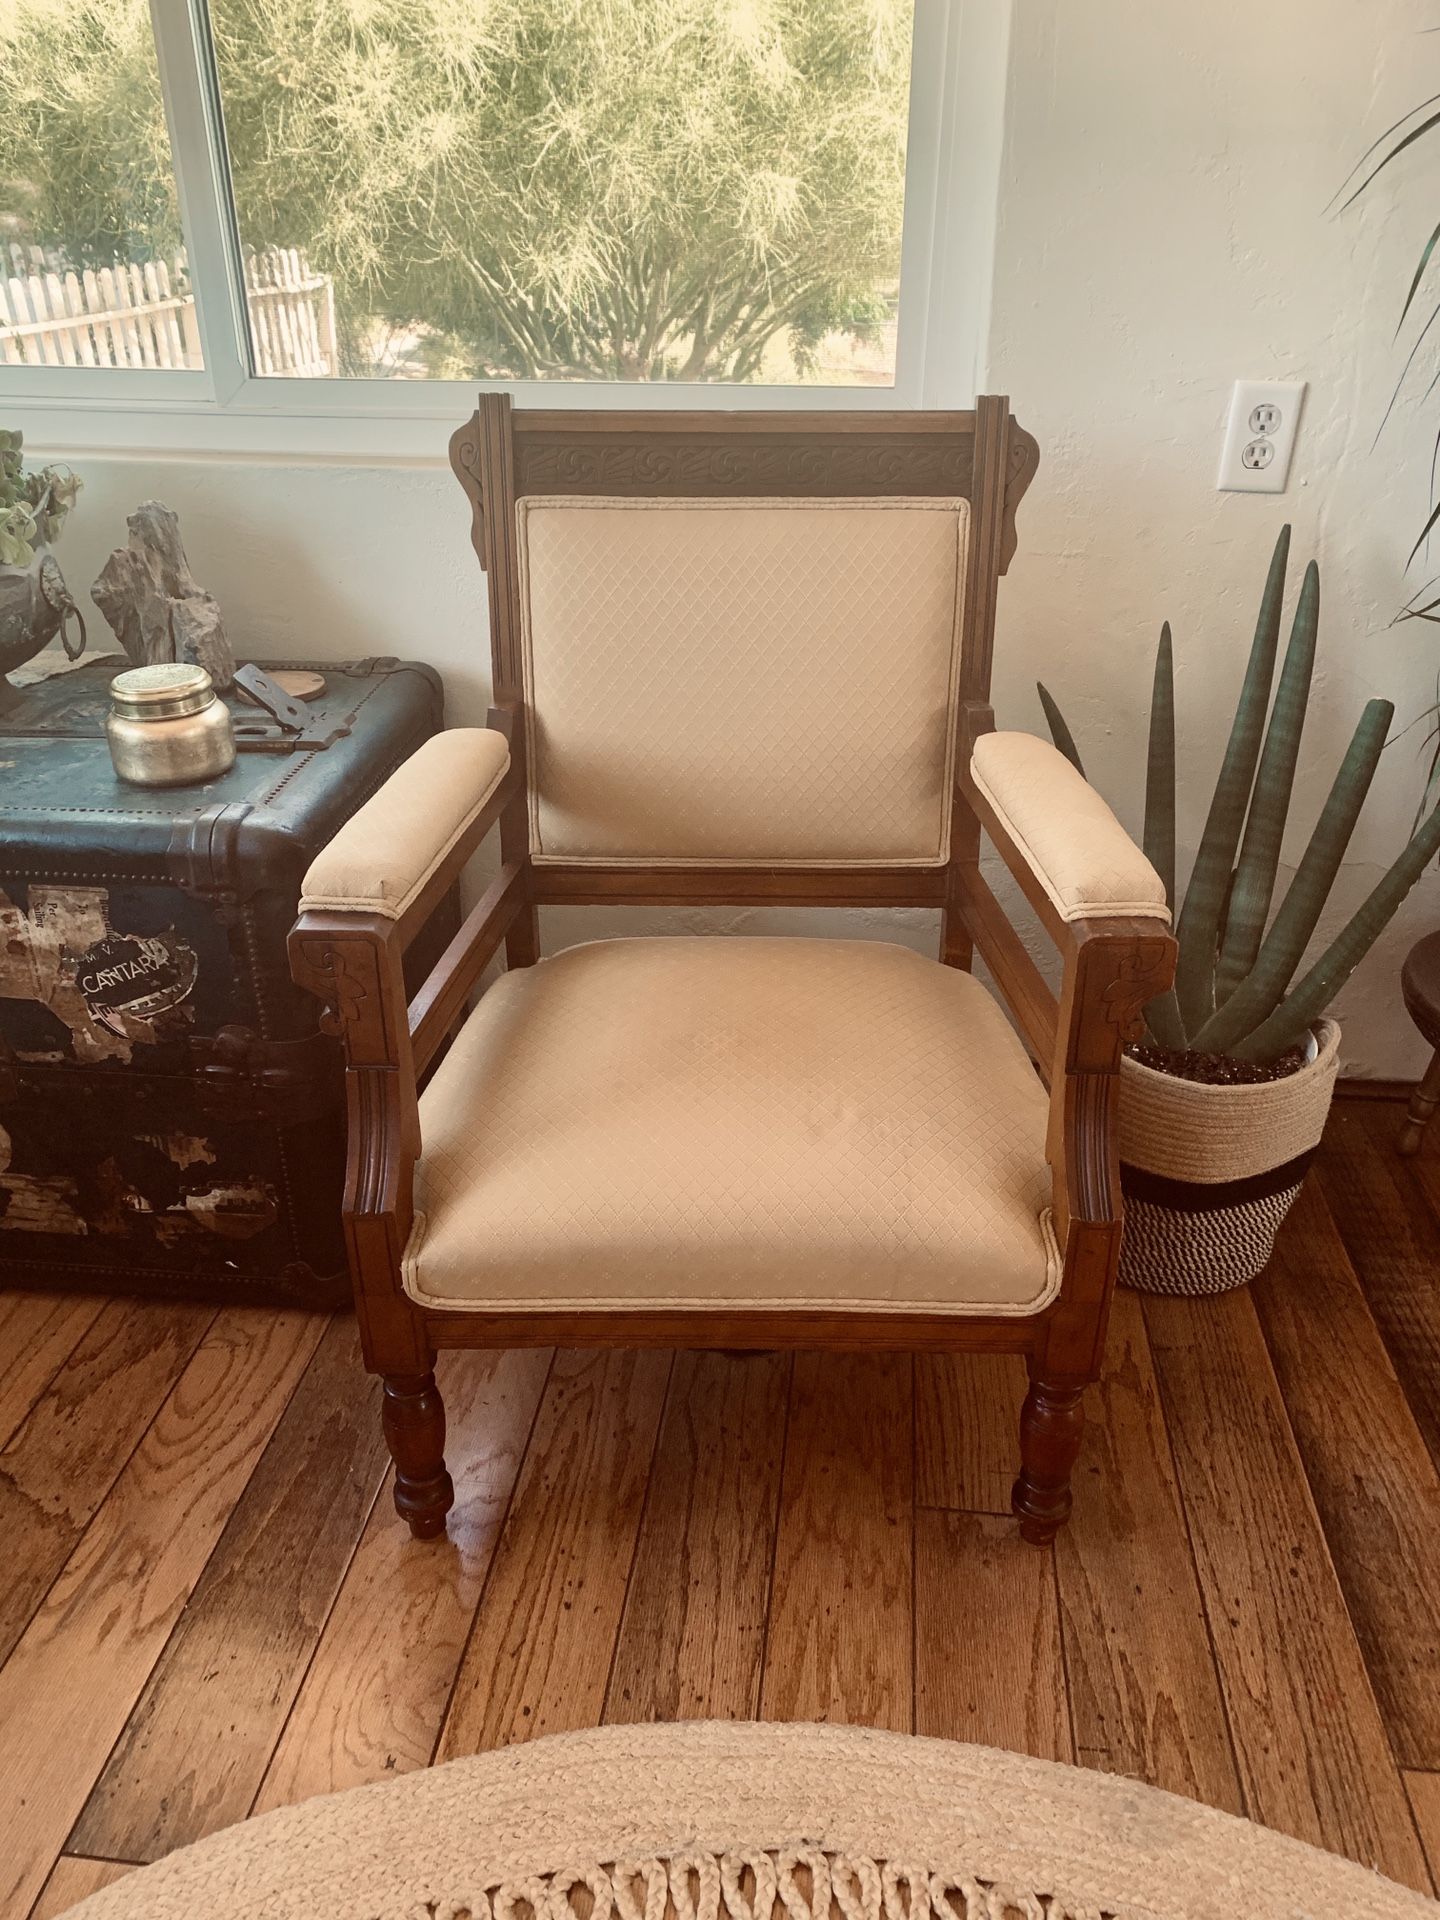 Eastlake style Victorian accent chair—vintage chair—antique chair